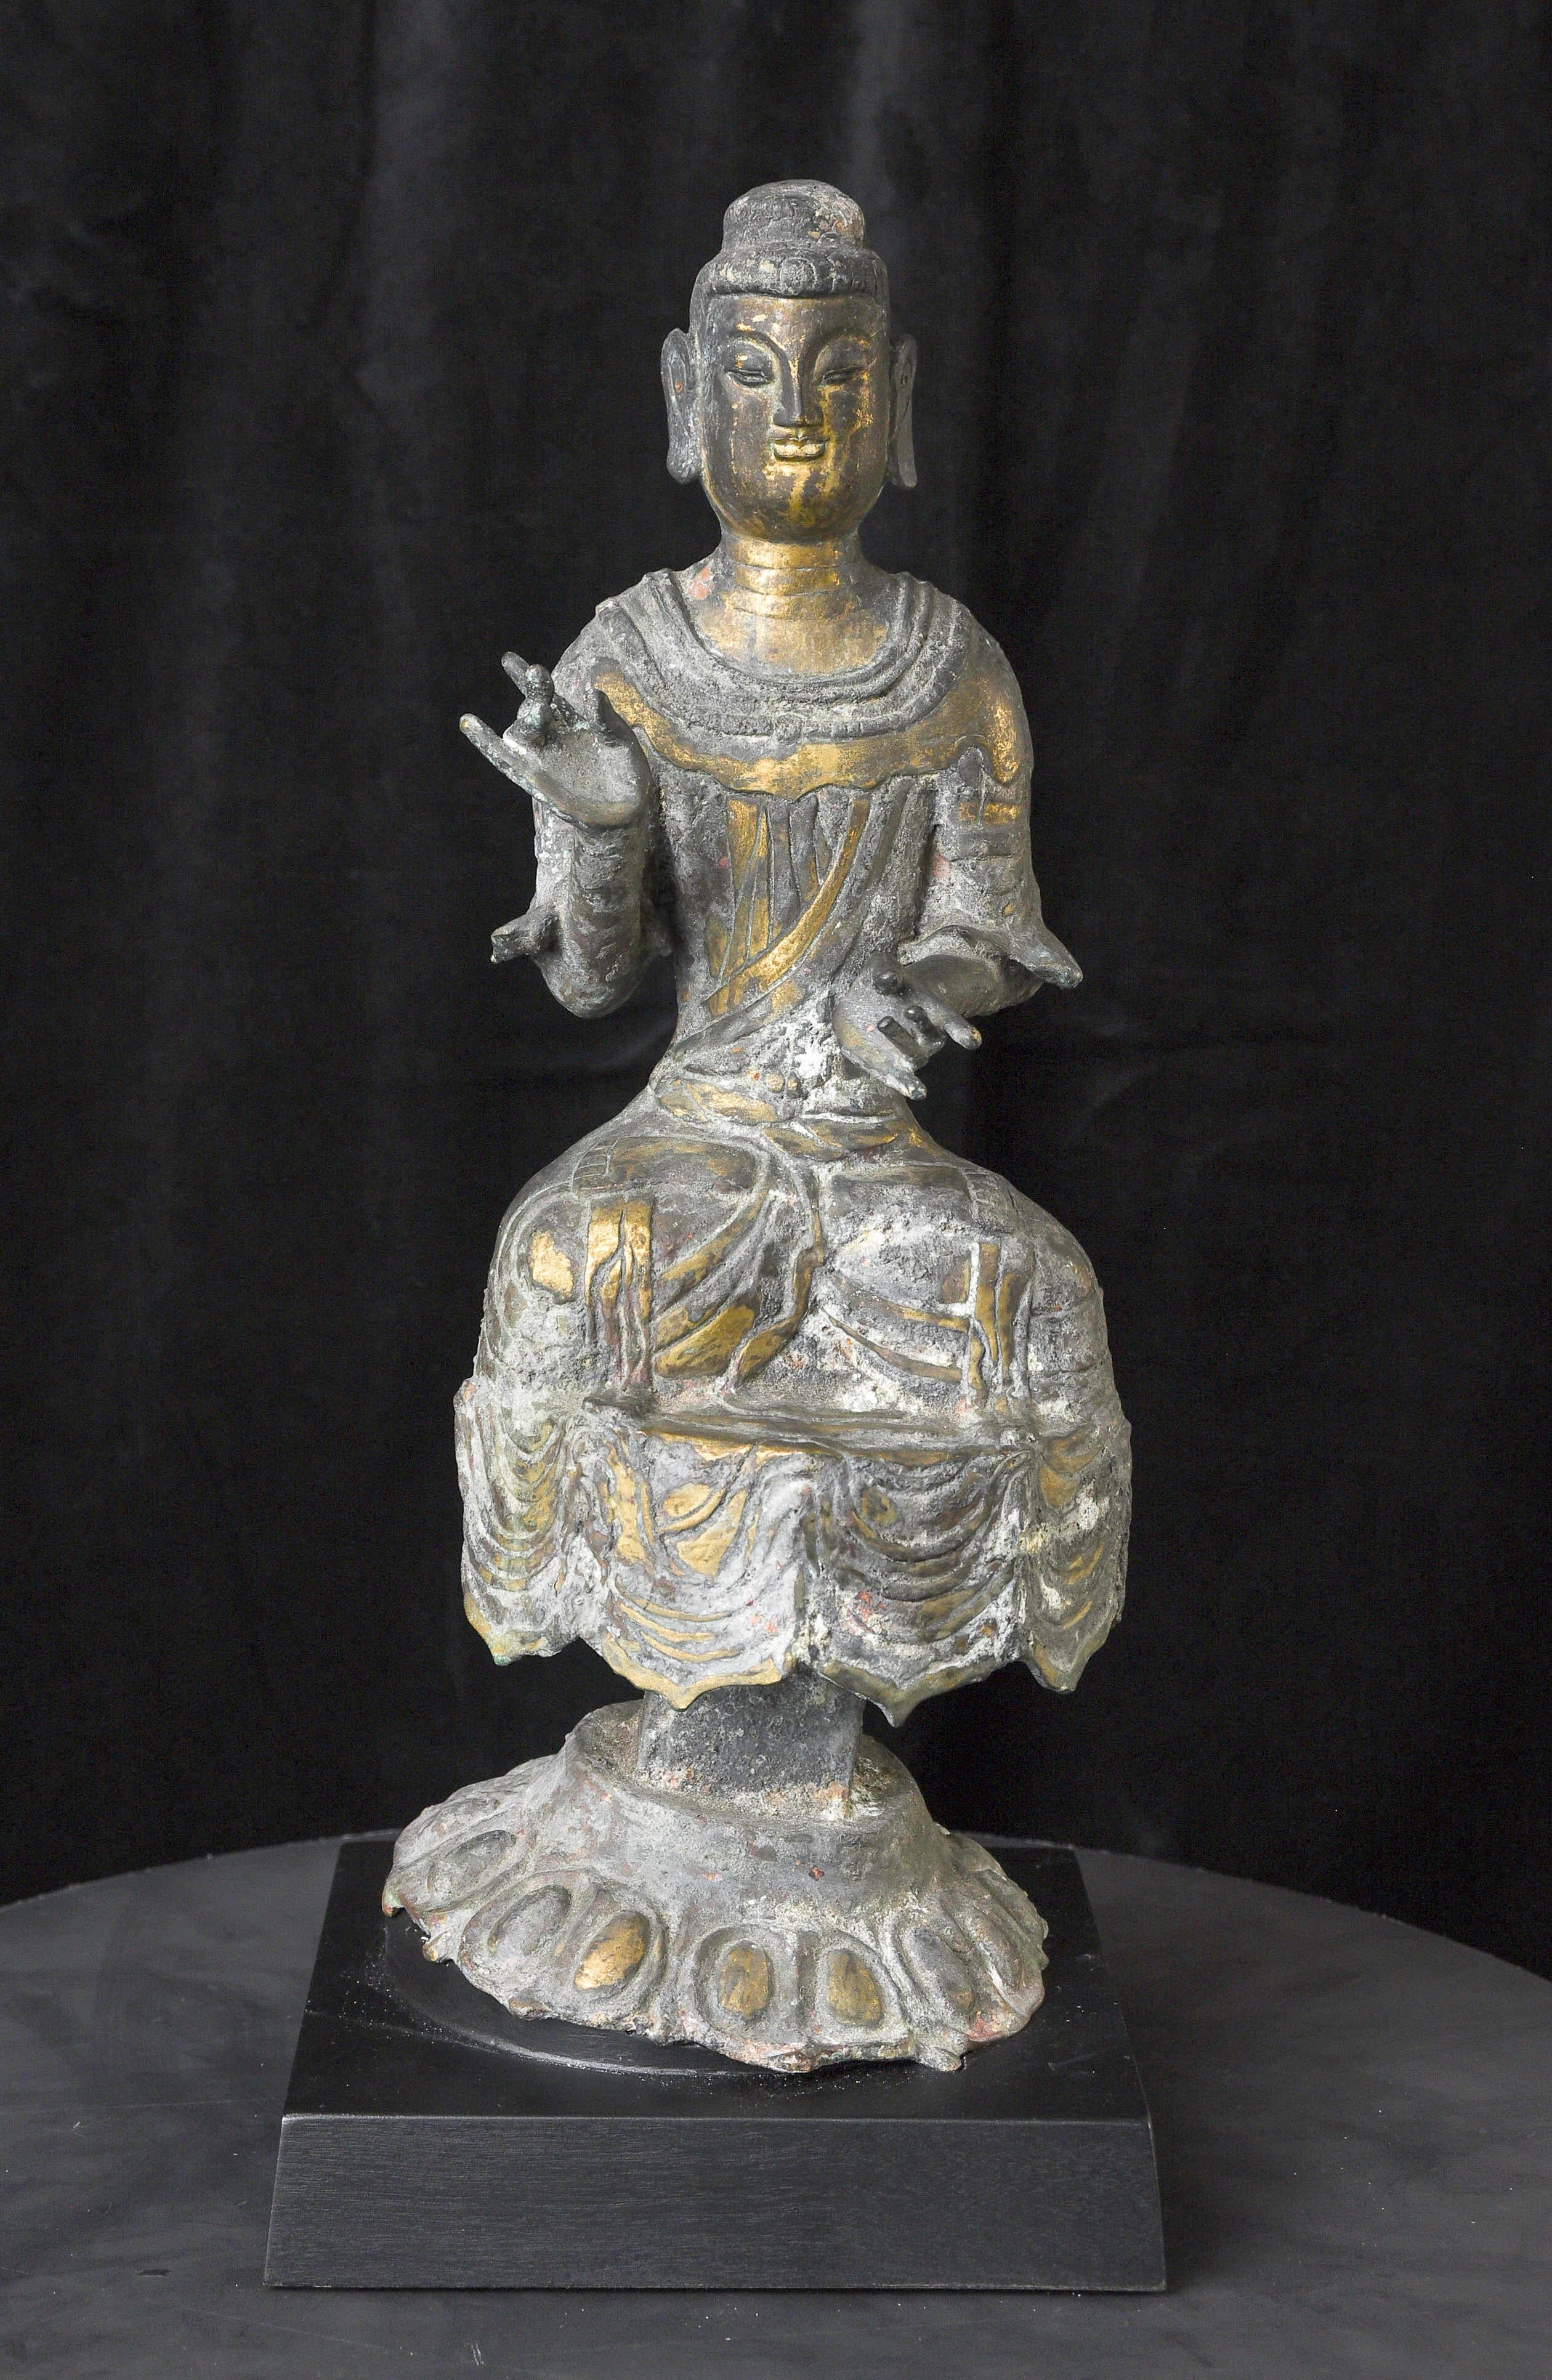 6-9th Century Silla Dynasty style Korean Buddha-Looks to have a very good age, but not a period piece. Extremely large at 16.5 in tall. Superb face. Korean national treasure number 79 (from 709 A.D.) has the same form, including the shape of the